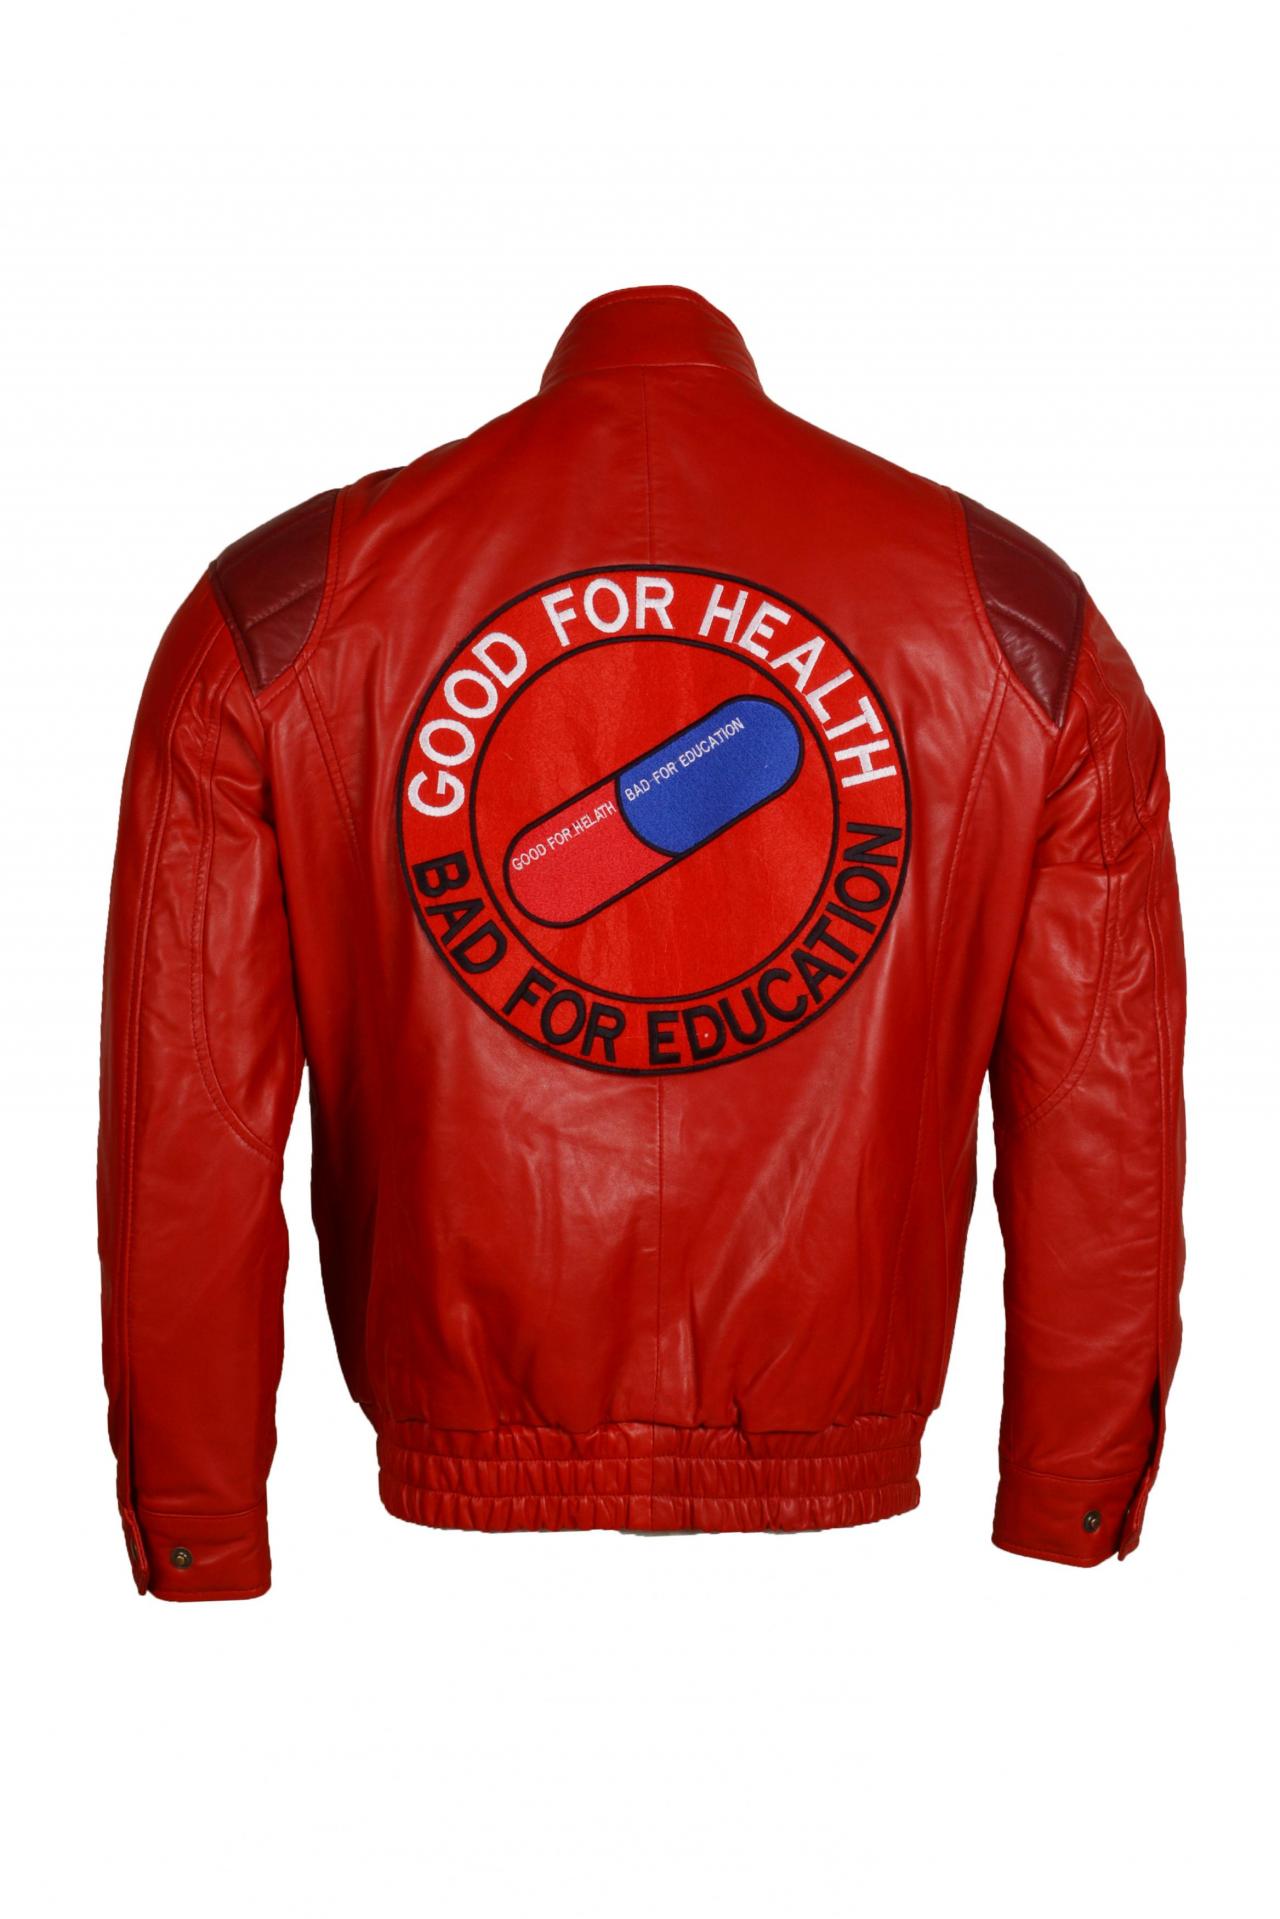 Akira Kaneda Capsule Health Cause Embroidered Red Real Leather Jacket